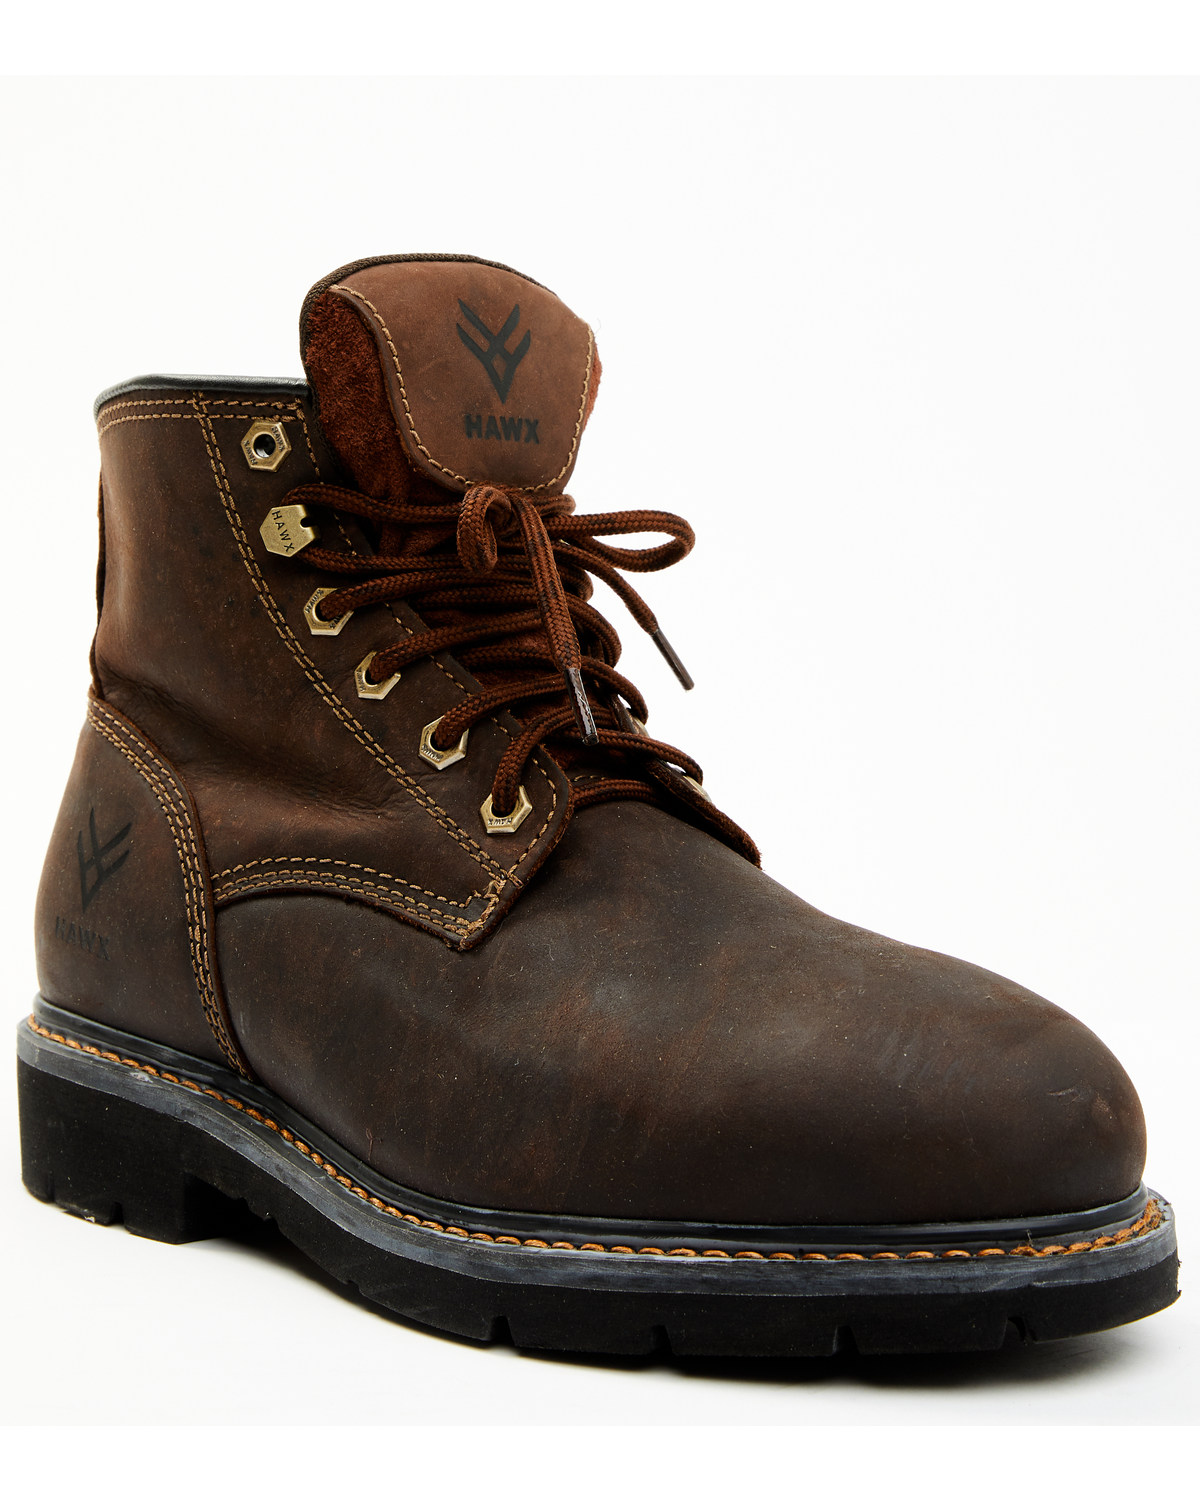 Hawx Men's Oily Crazy Horse Lace-Up 6" Work Boot - Composite Toe